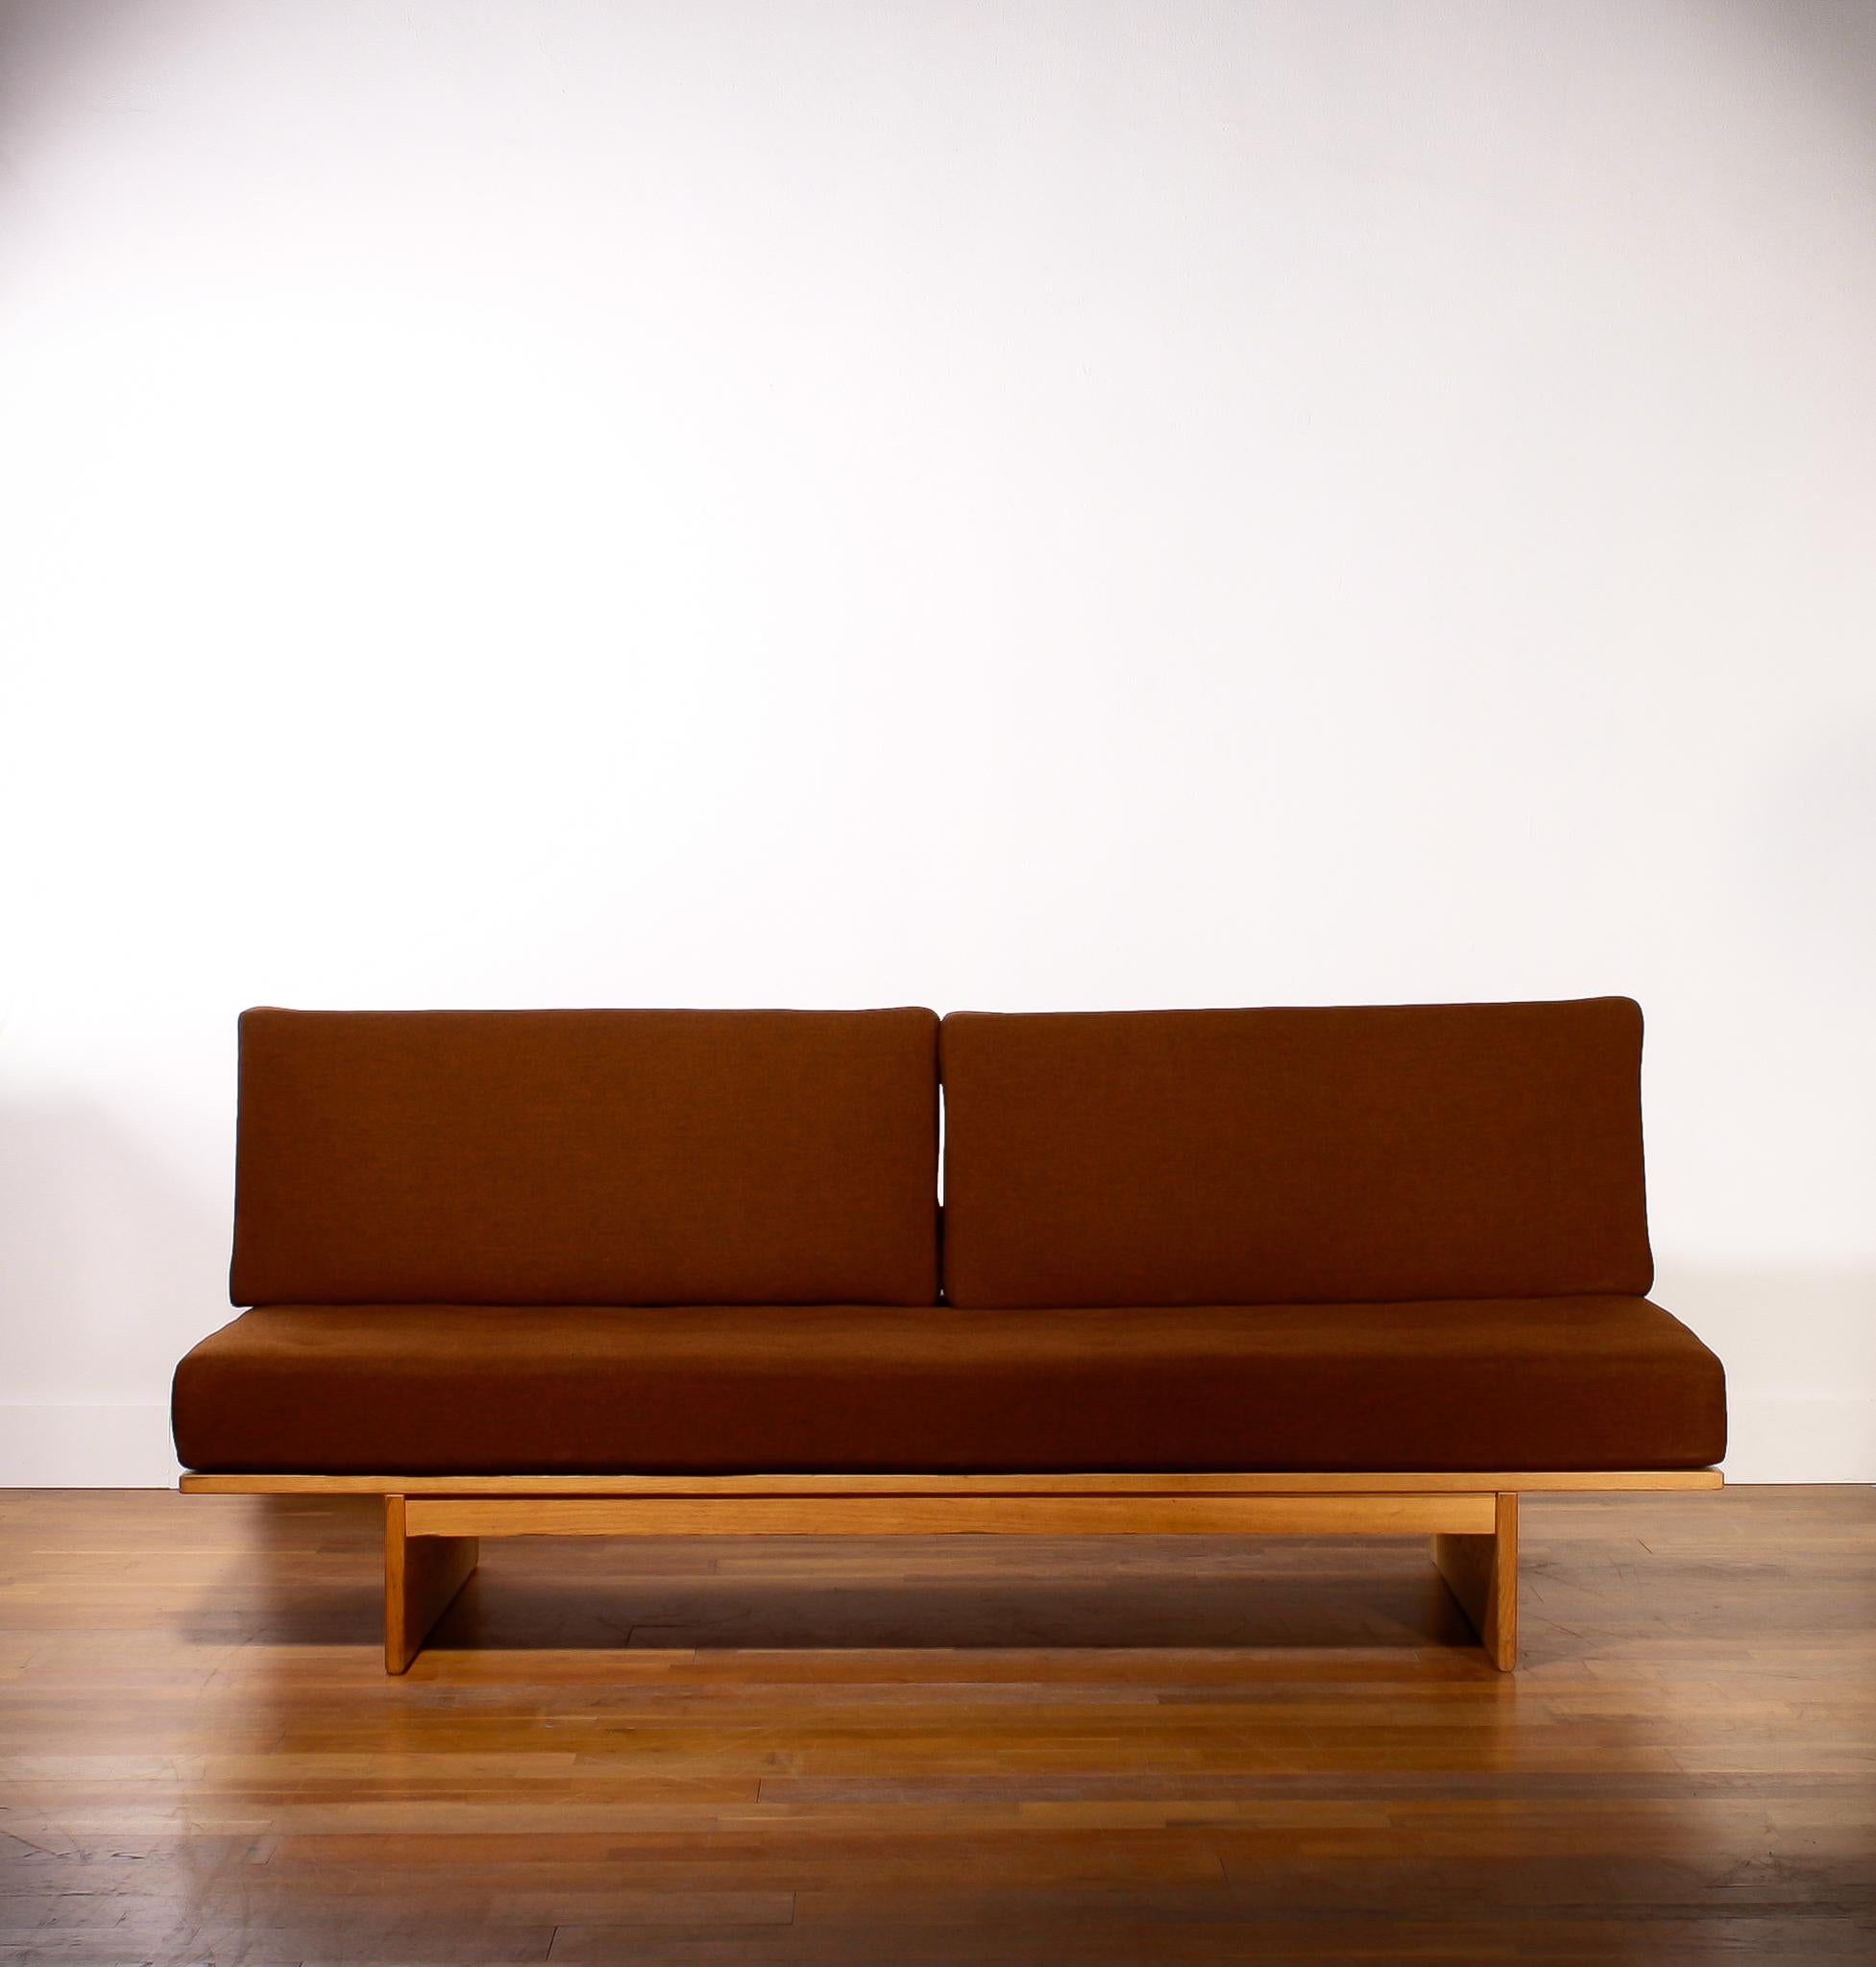 In absolute top condition sleeper or daybed in oak and dark brown wool.
The oakwood frame and the dark brown wool upholstery are in excellent condition.
Designed by Bra Bohag.
Manufactured by DUX.
Design period 1960-1969.
The dimensions are H